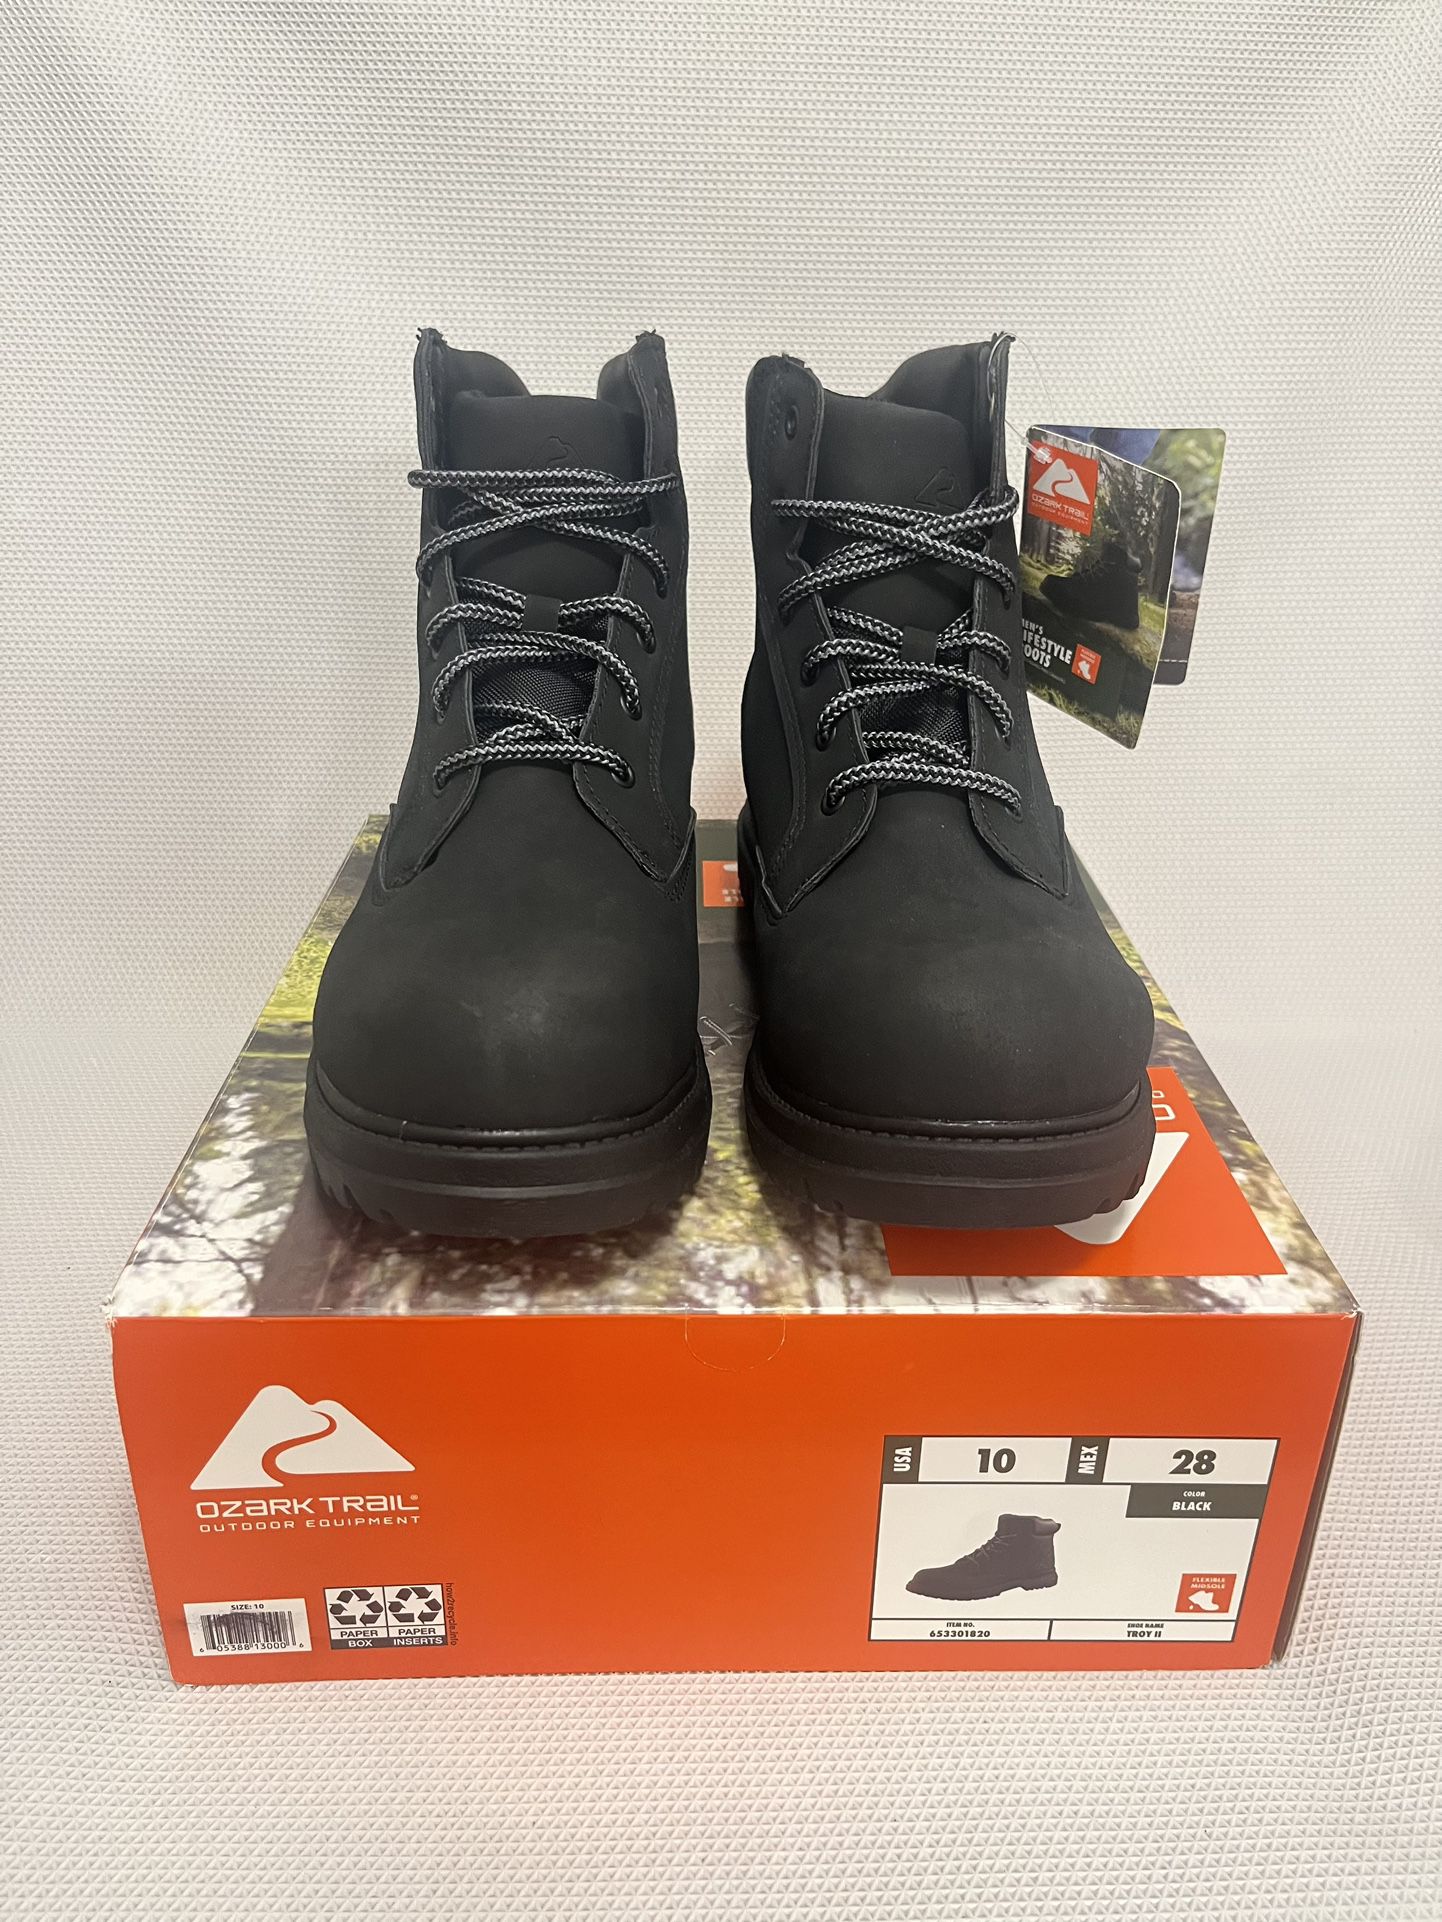 New Mens  Boots High-Top Size 10